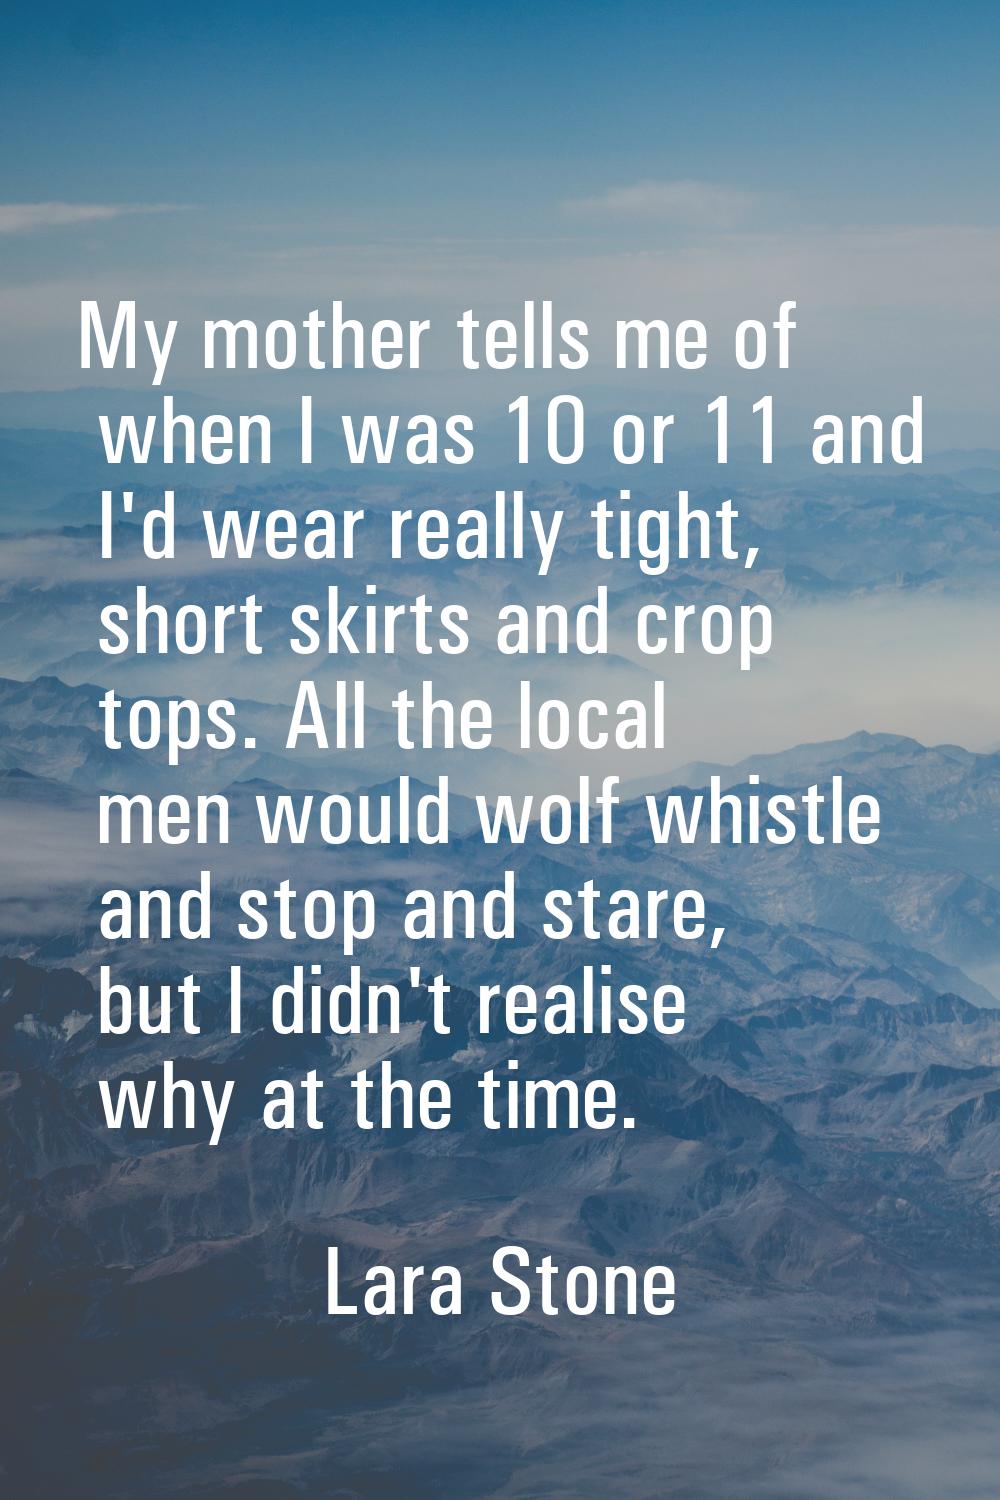 My mother tells me of when I was 10 or 11 and I'd wear really tight, short skirts and crop tops. Al